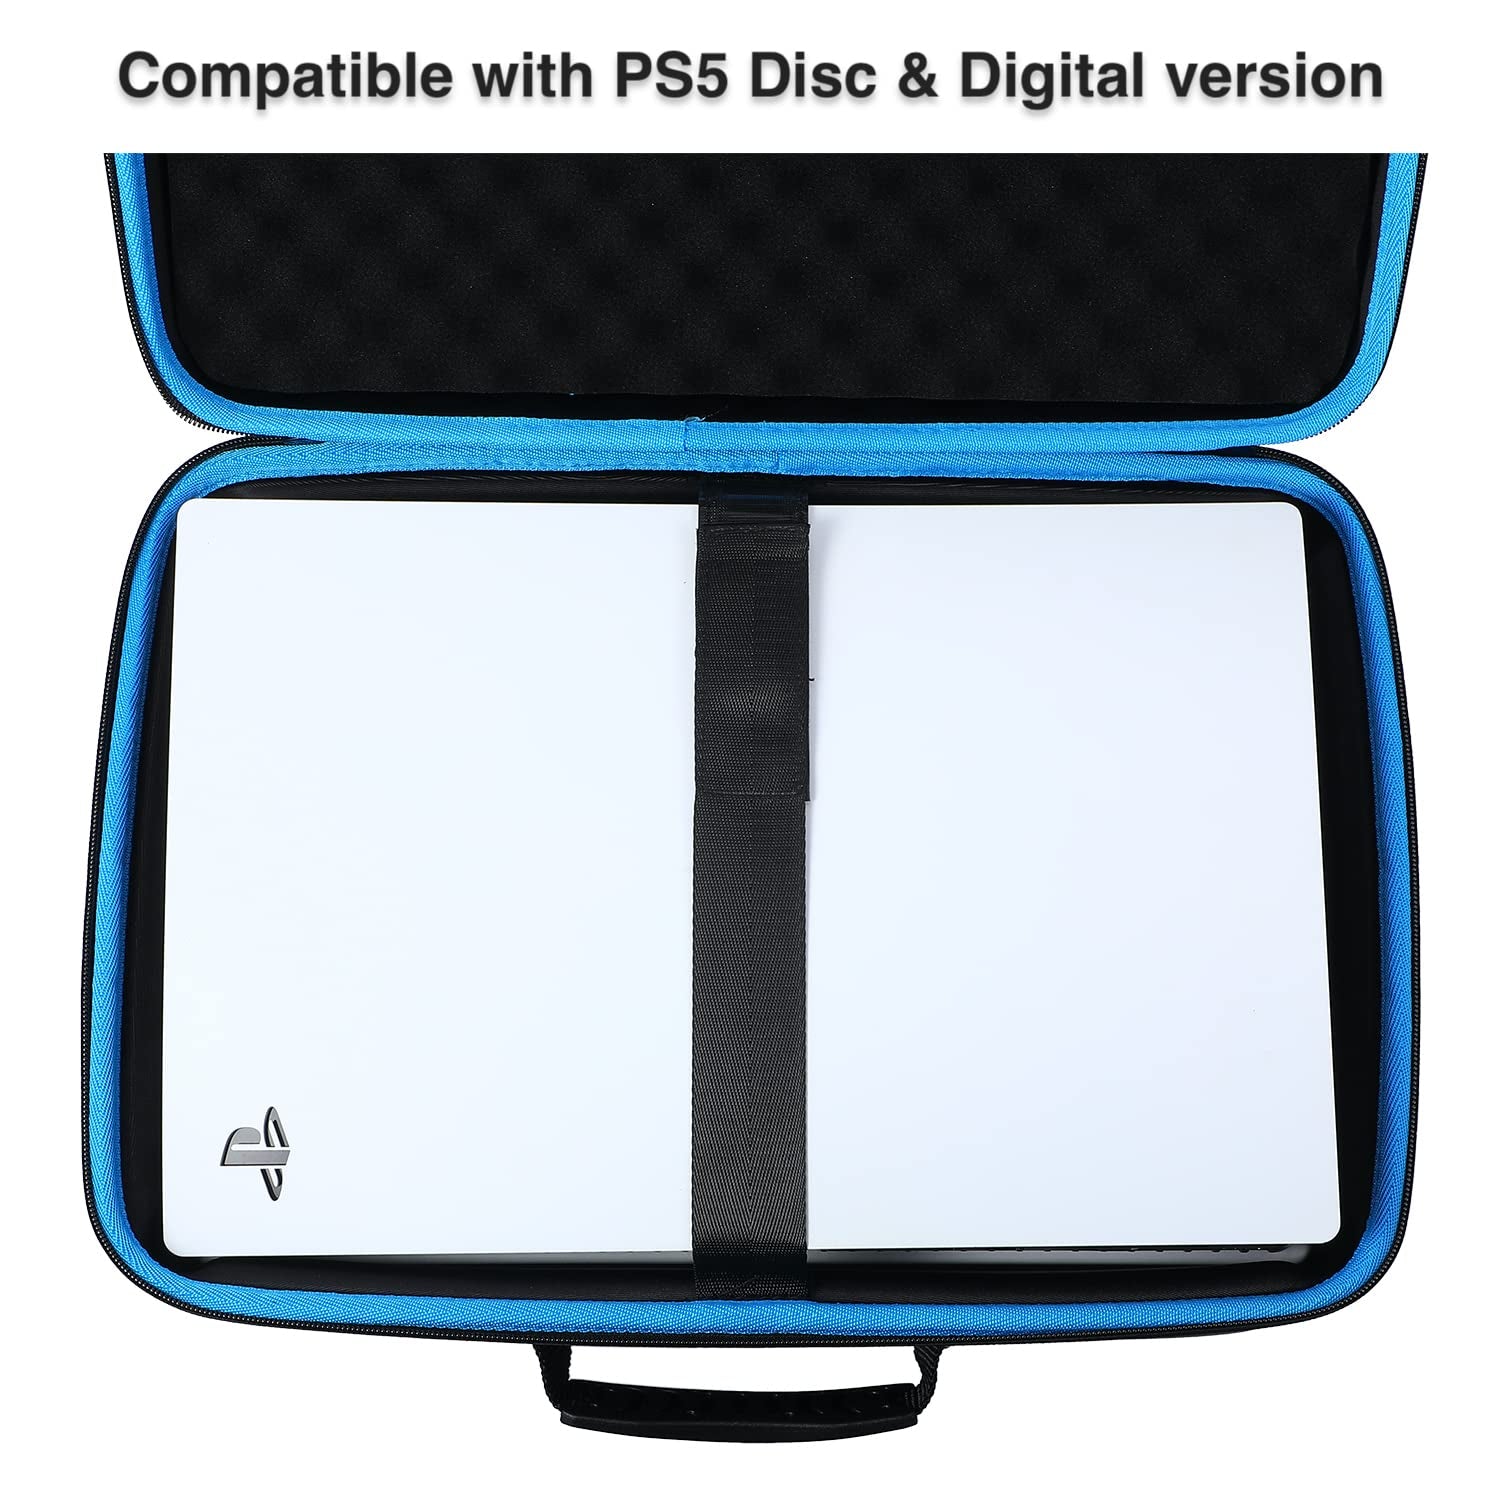 Hard-Shell Travel Case Compatible with PS5, Protective Carrying Case Holds Playstation 5 Console, Wireless Dualsense Controllers, Original Base, Cables and Other Accessories